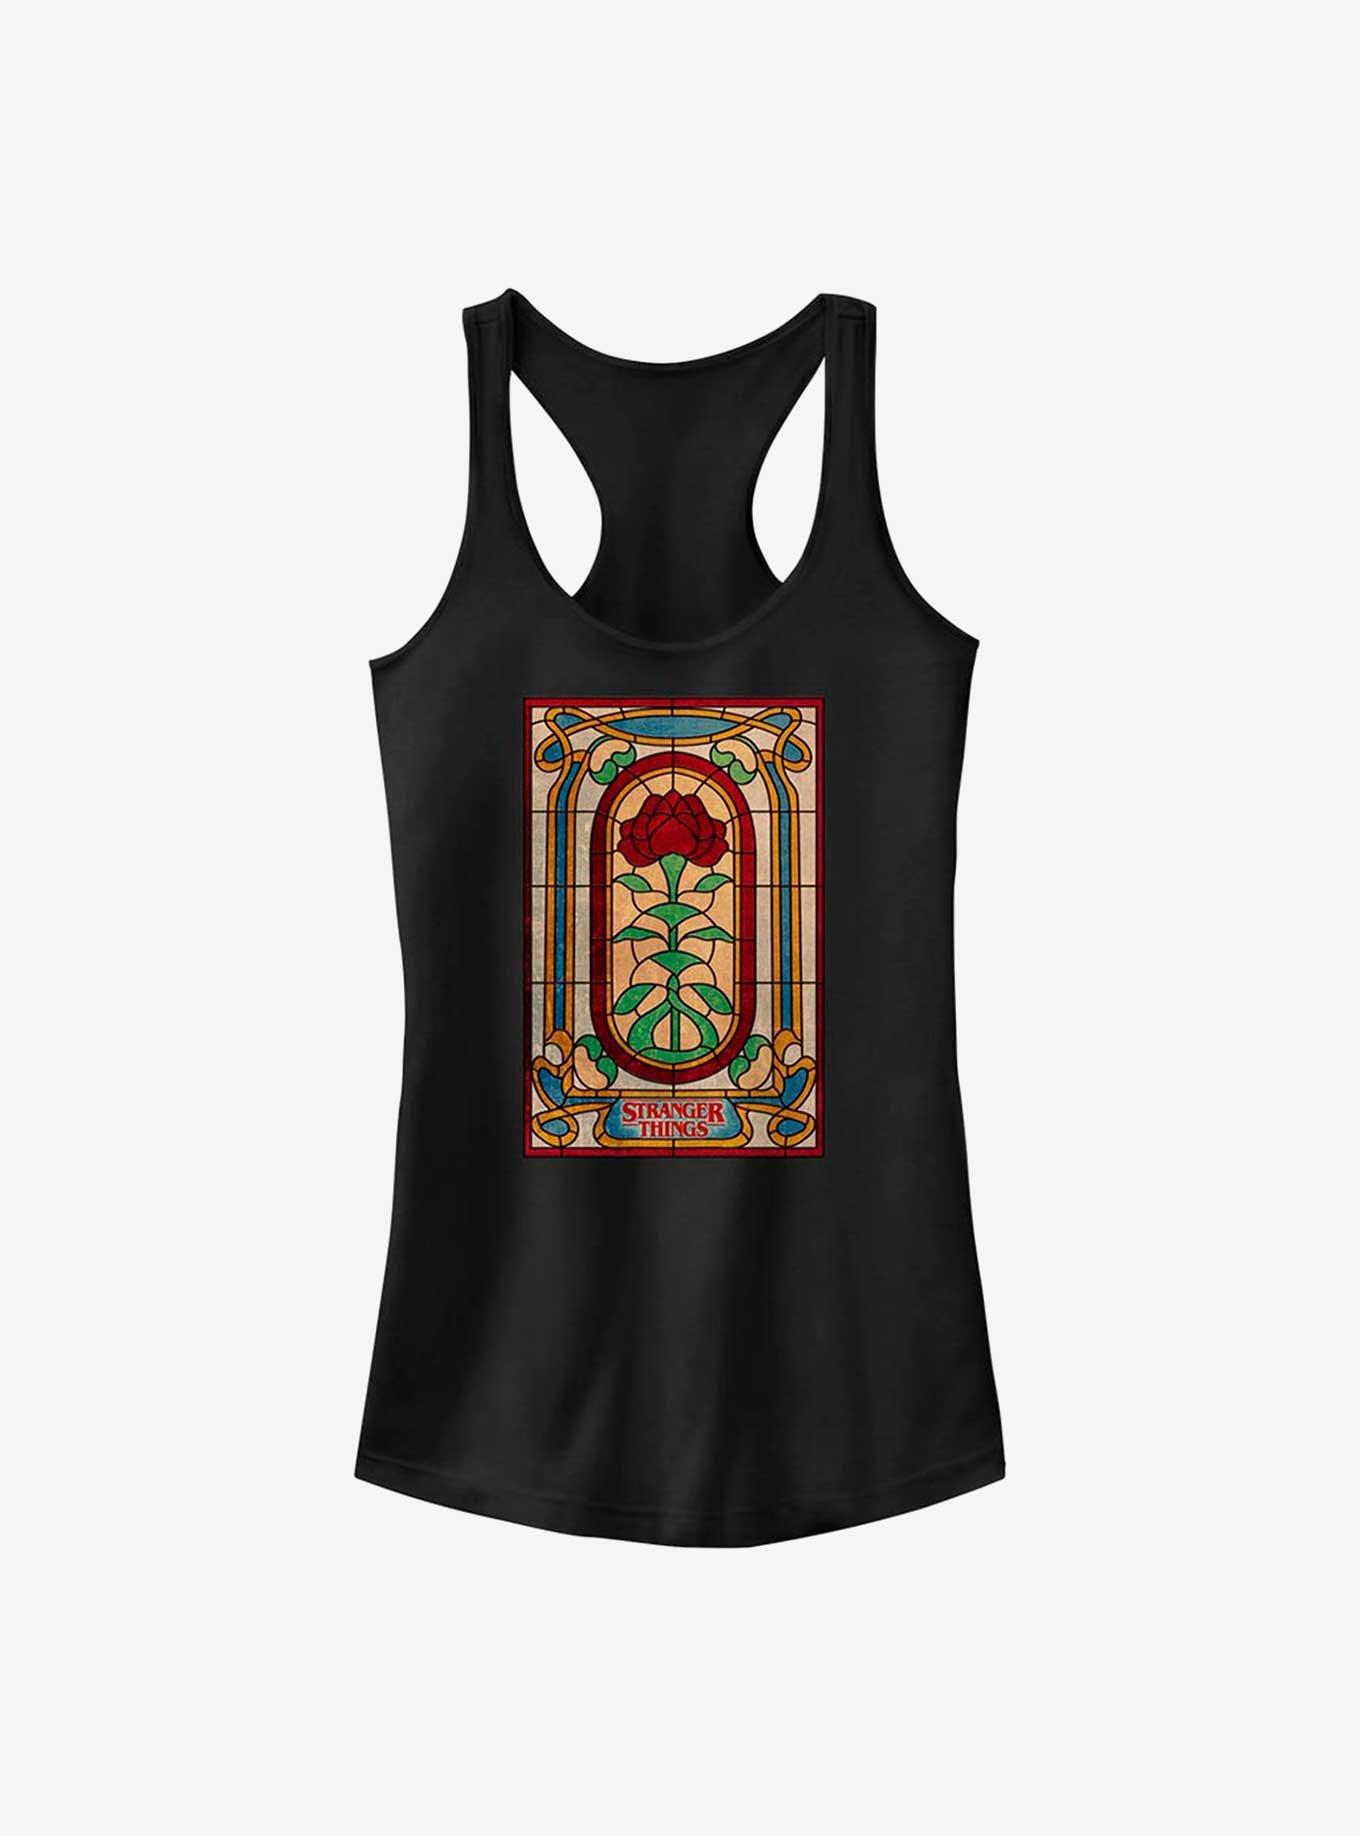 Stranger Things Stained Glass Rose Girls Tank Top, BLACK, hi-res